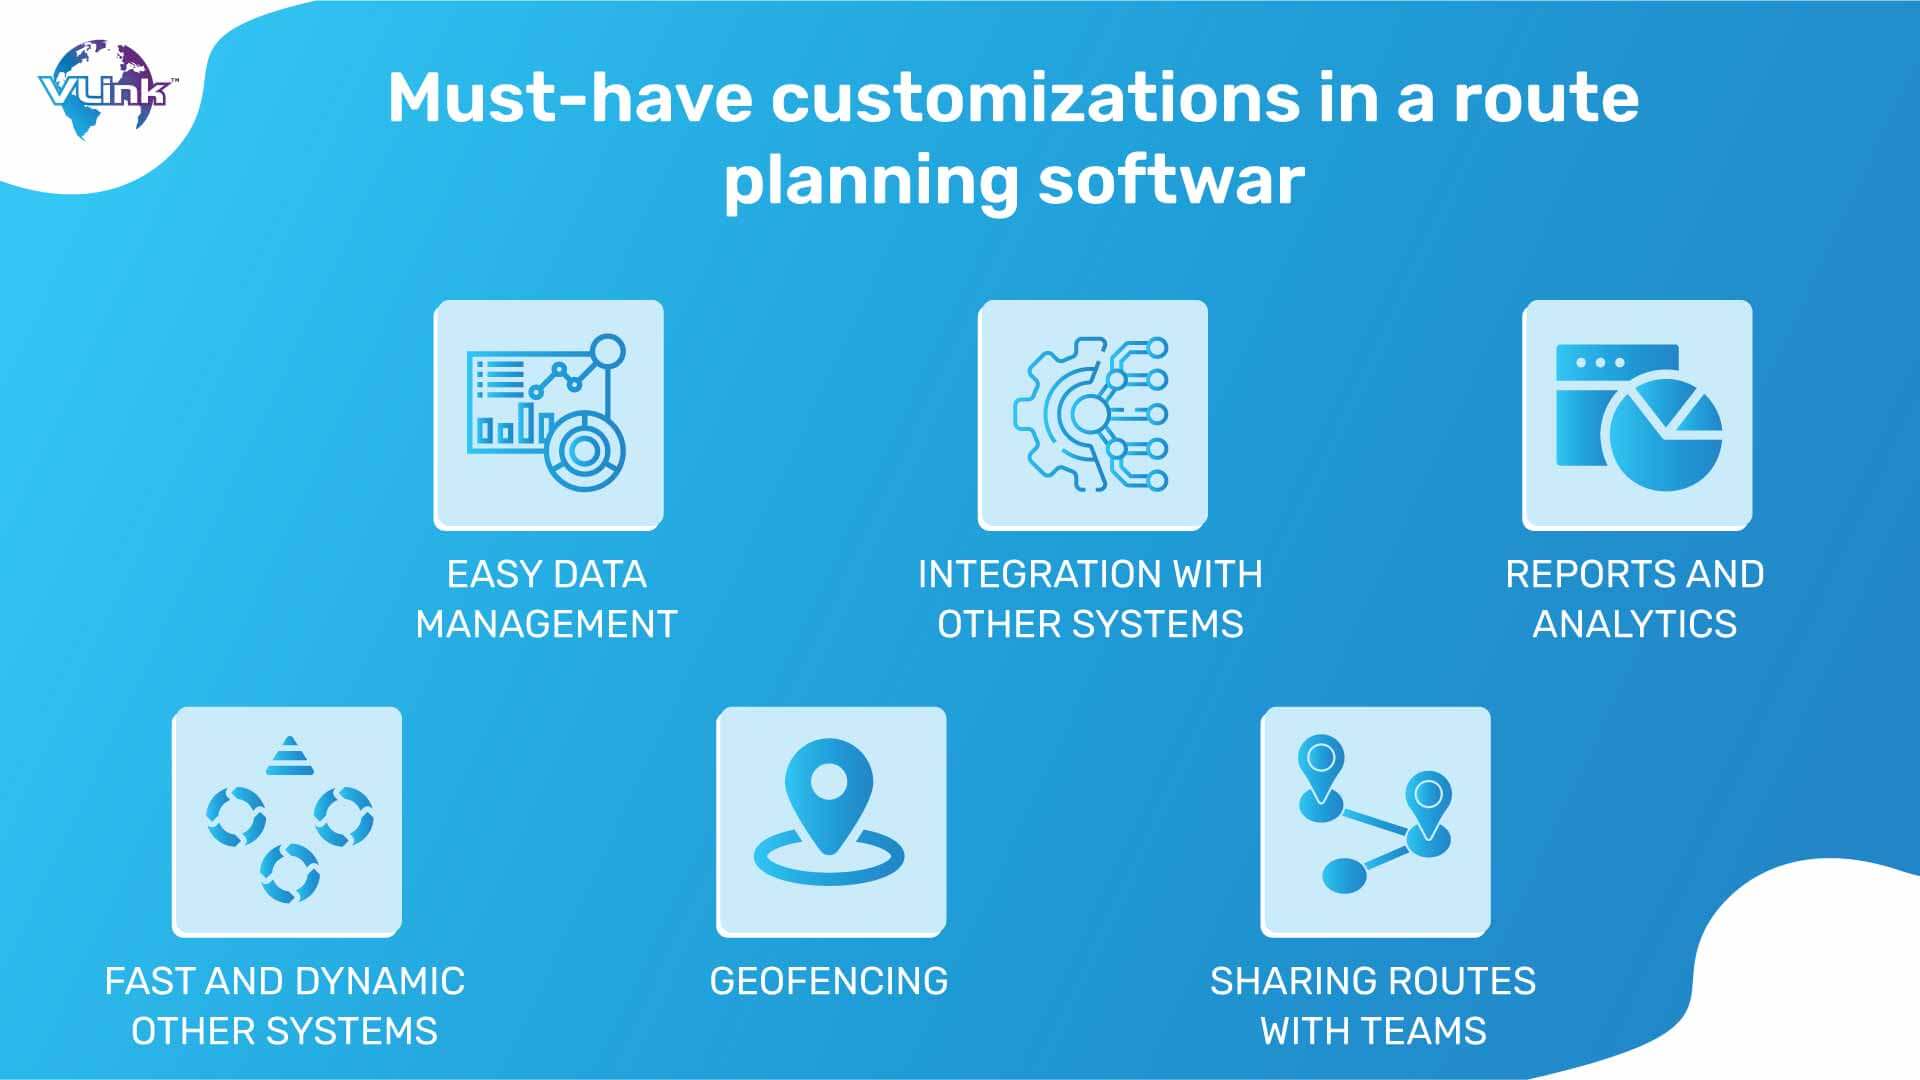 Must-have customizations in a route planning software